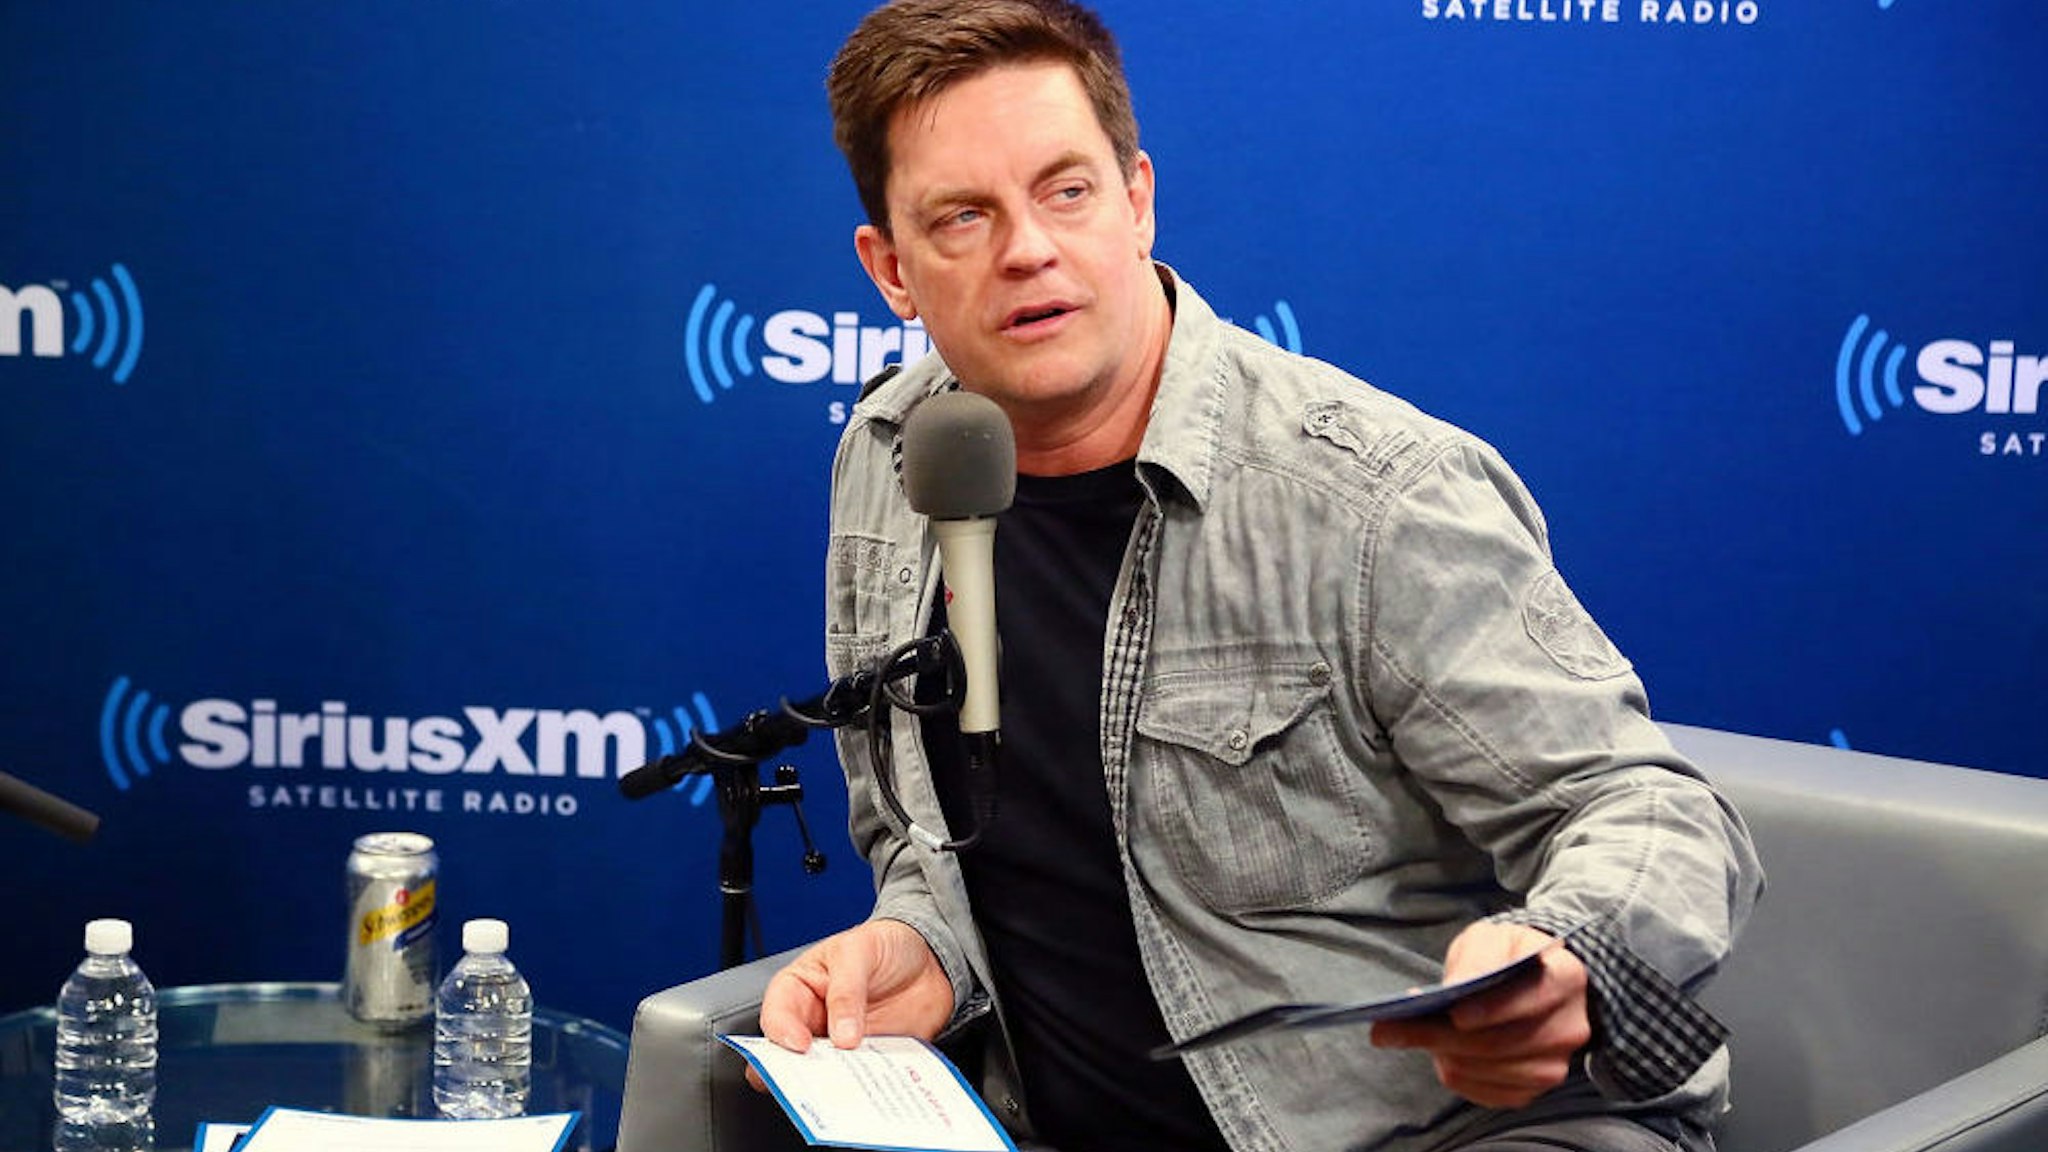 Jim Breuer talks with Larry the Cable Guy about the new film 'Cars 3' with during a SiriusXM "Town Hall" on June 16, 2017 in New York City.